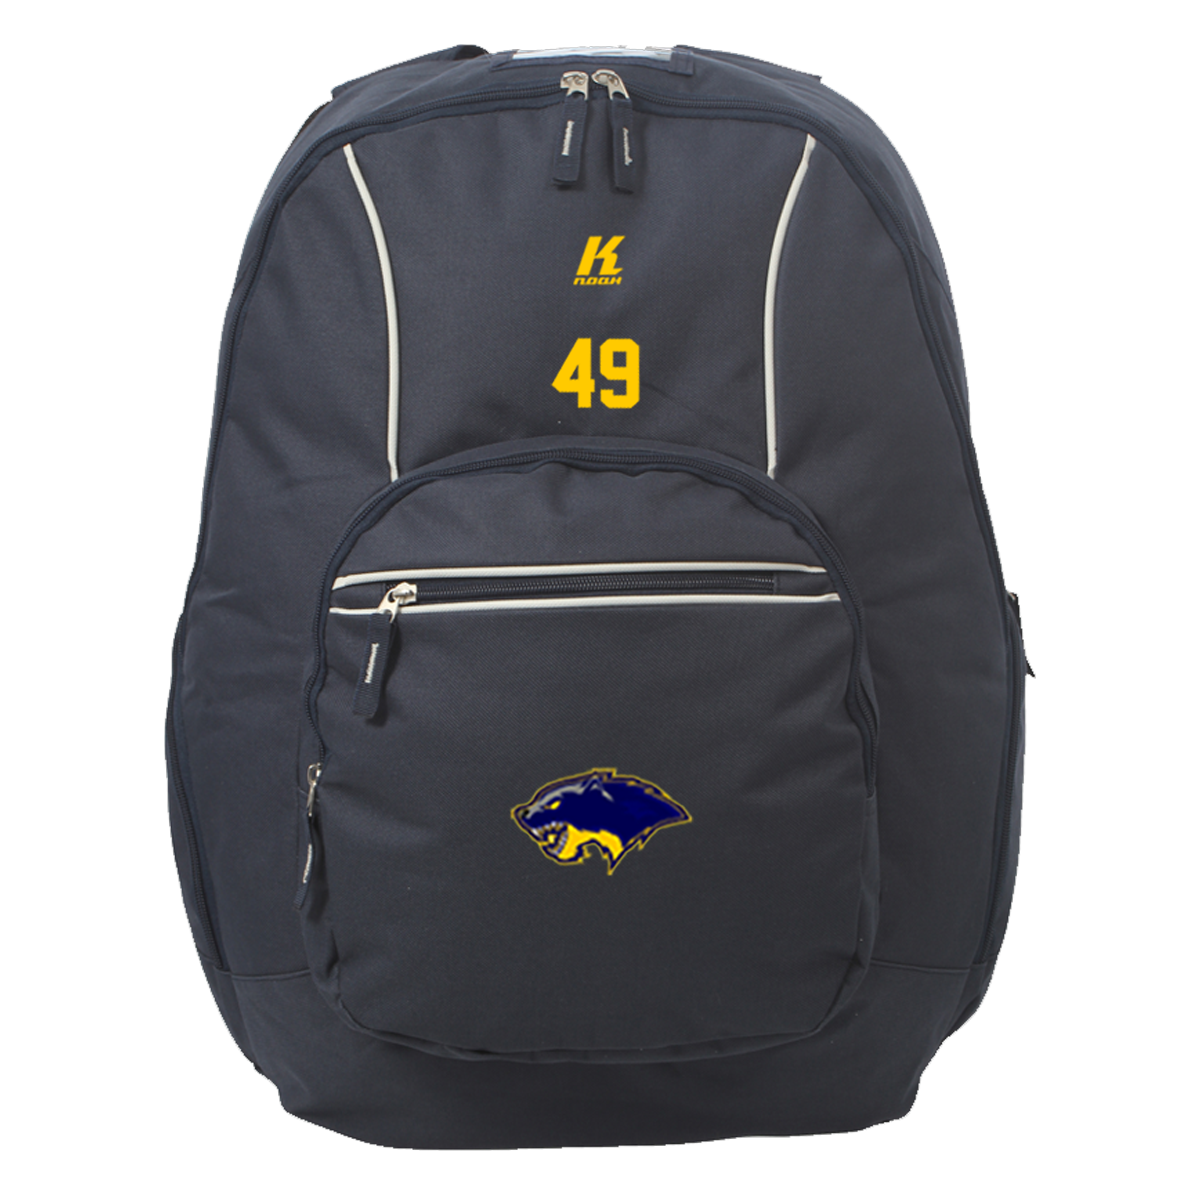 Wolverines Heritage Backpack with Playernumber or Initials